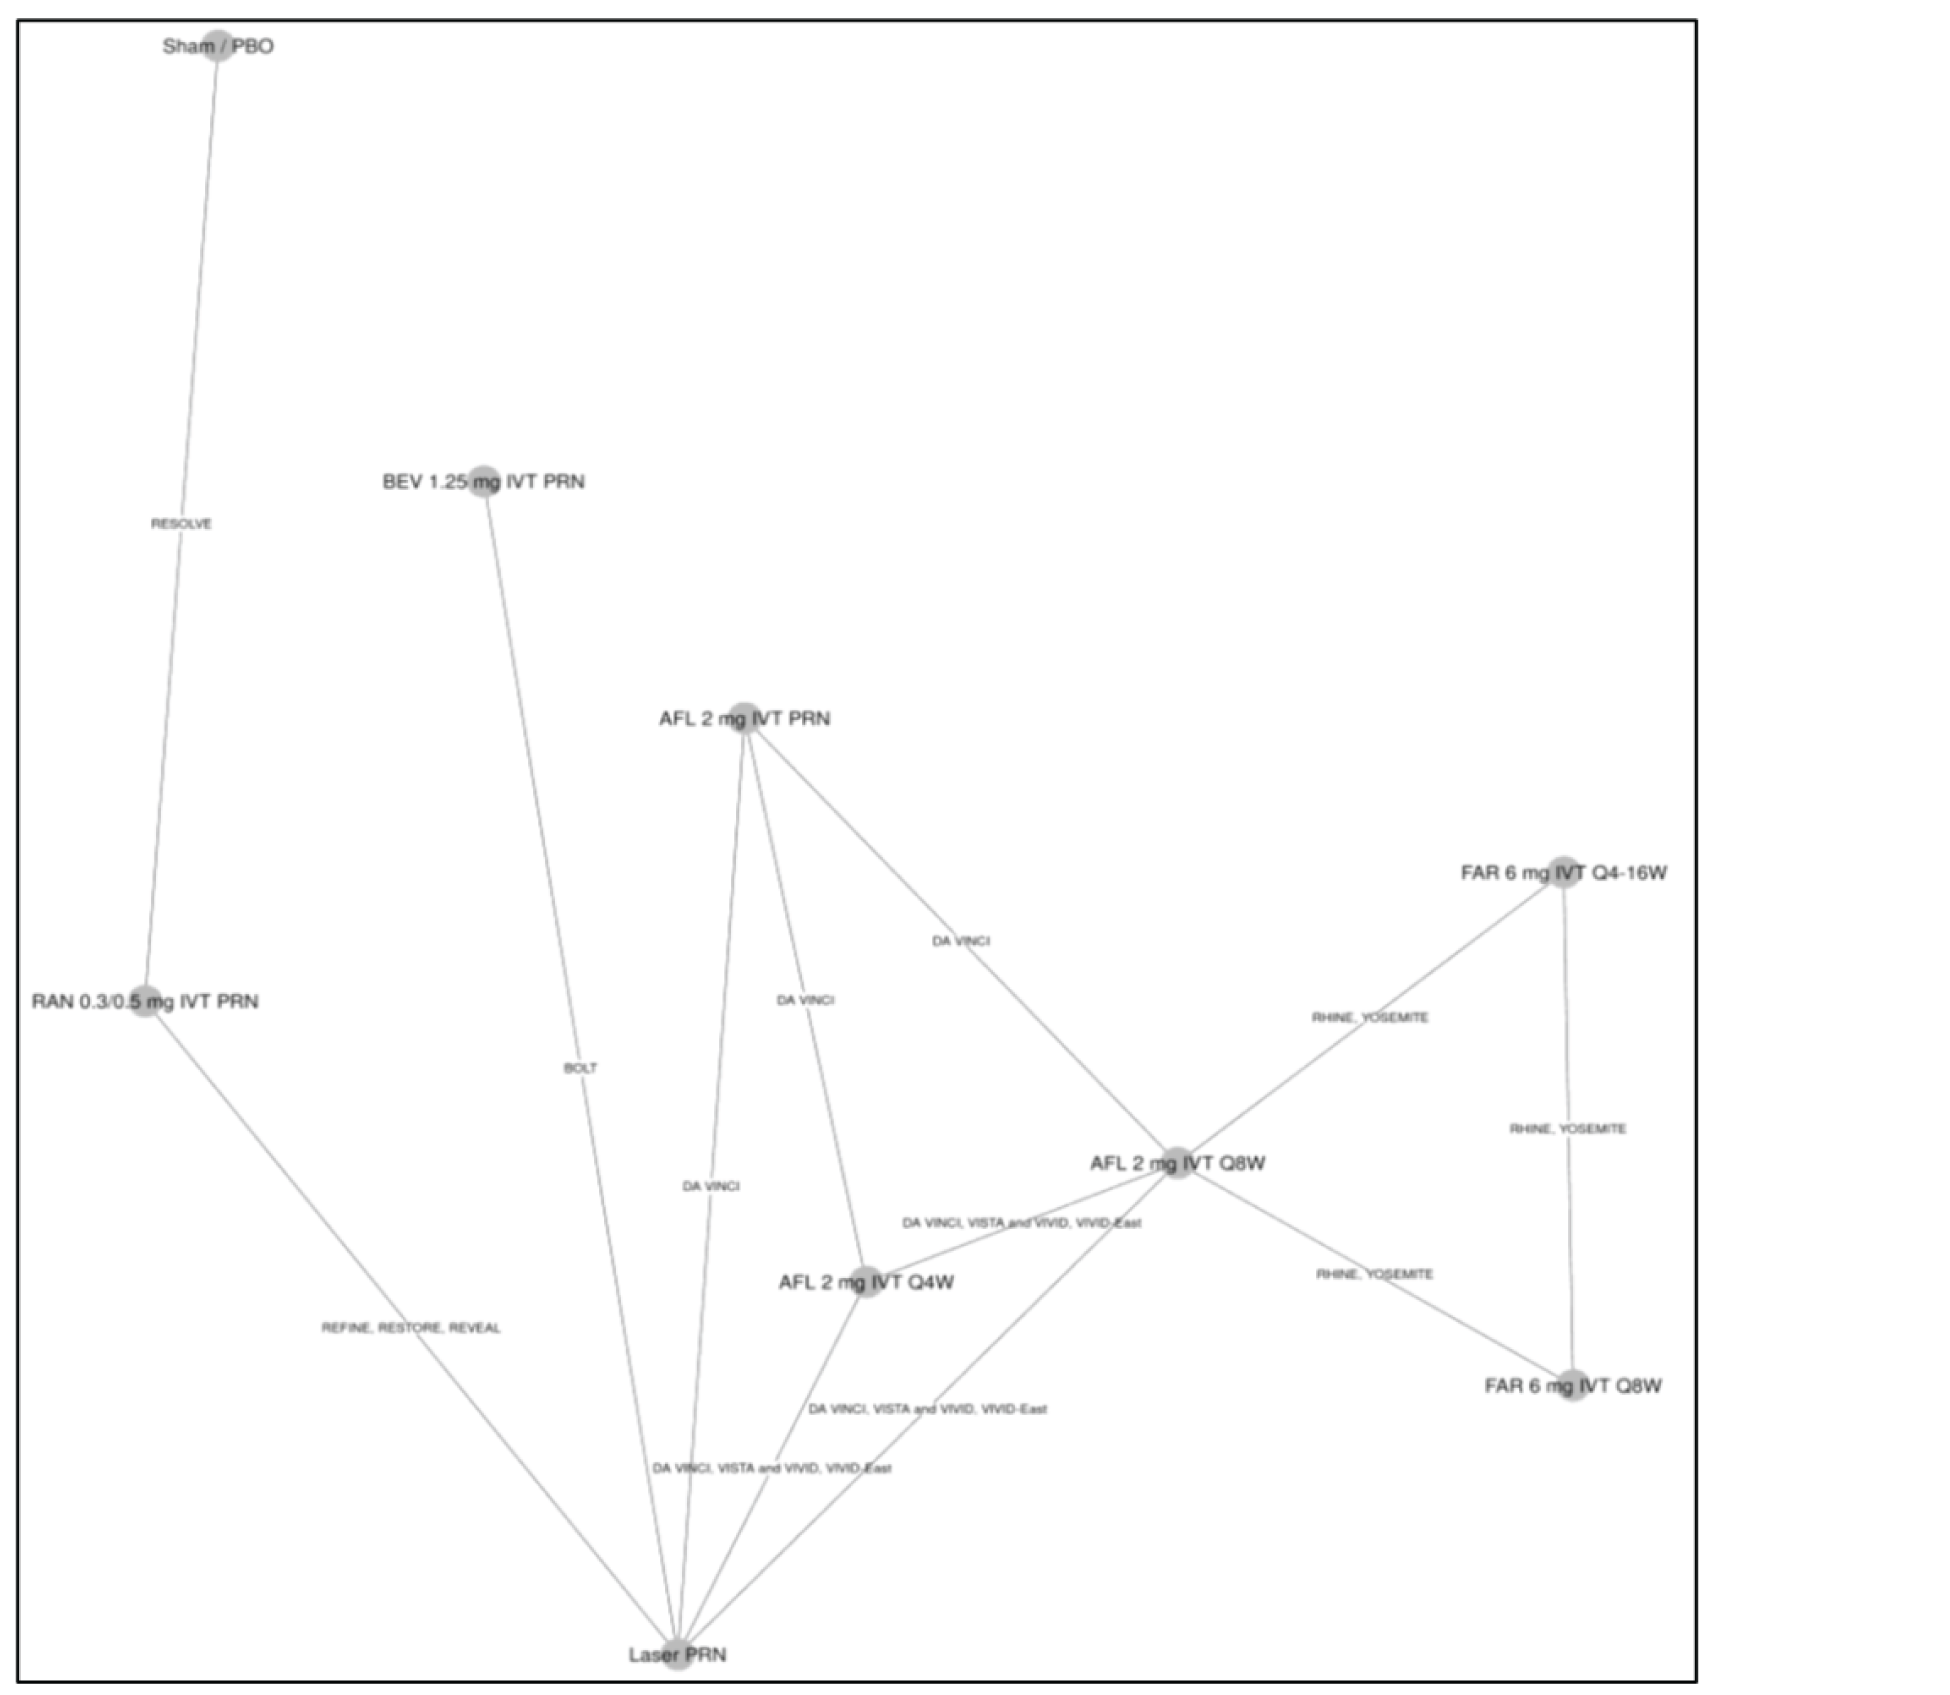 Ten trials reported on all ocular adverse effects at 12 months and were connected in a network. There are 3 connected star diagrams with 3 or more connections: aflibercept 2 mg IVT PRN; aflibercept 2 mg IVT q.4.w.; and aflibercept 2 mg IVT q.8.w. The most common connection was aflibercept 2 mg IVT q.8.w.